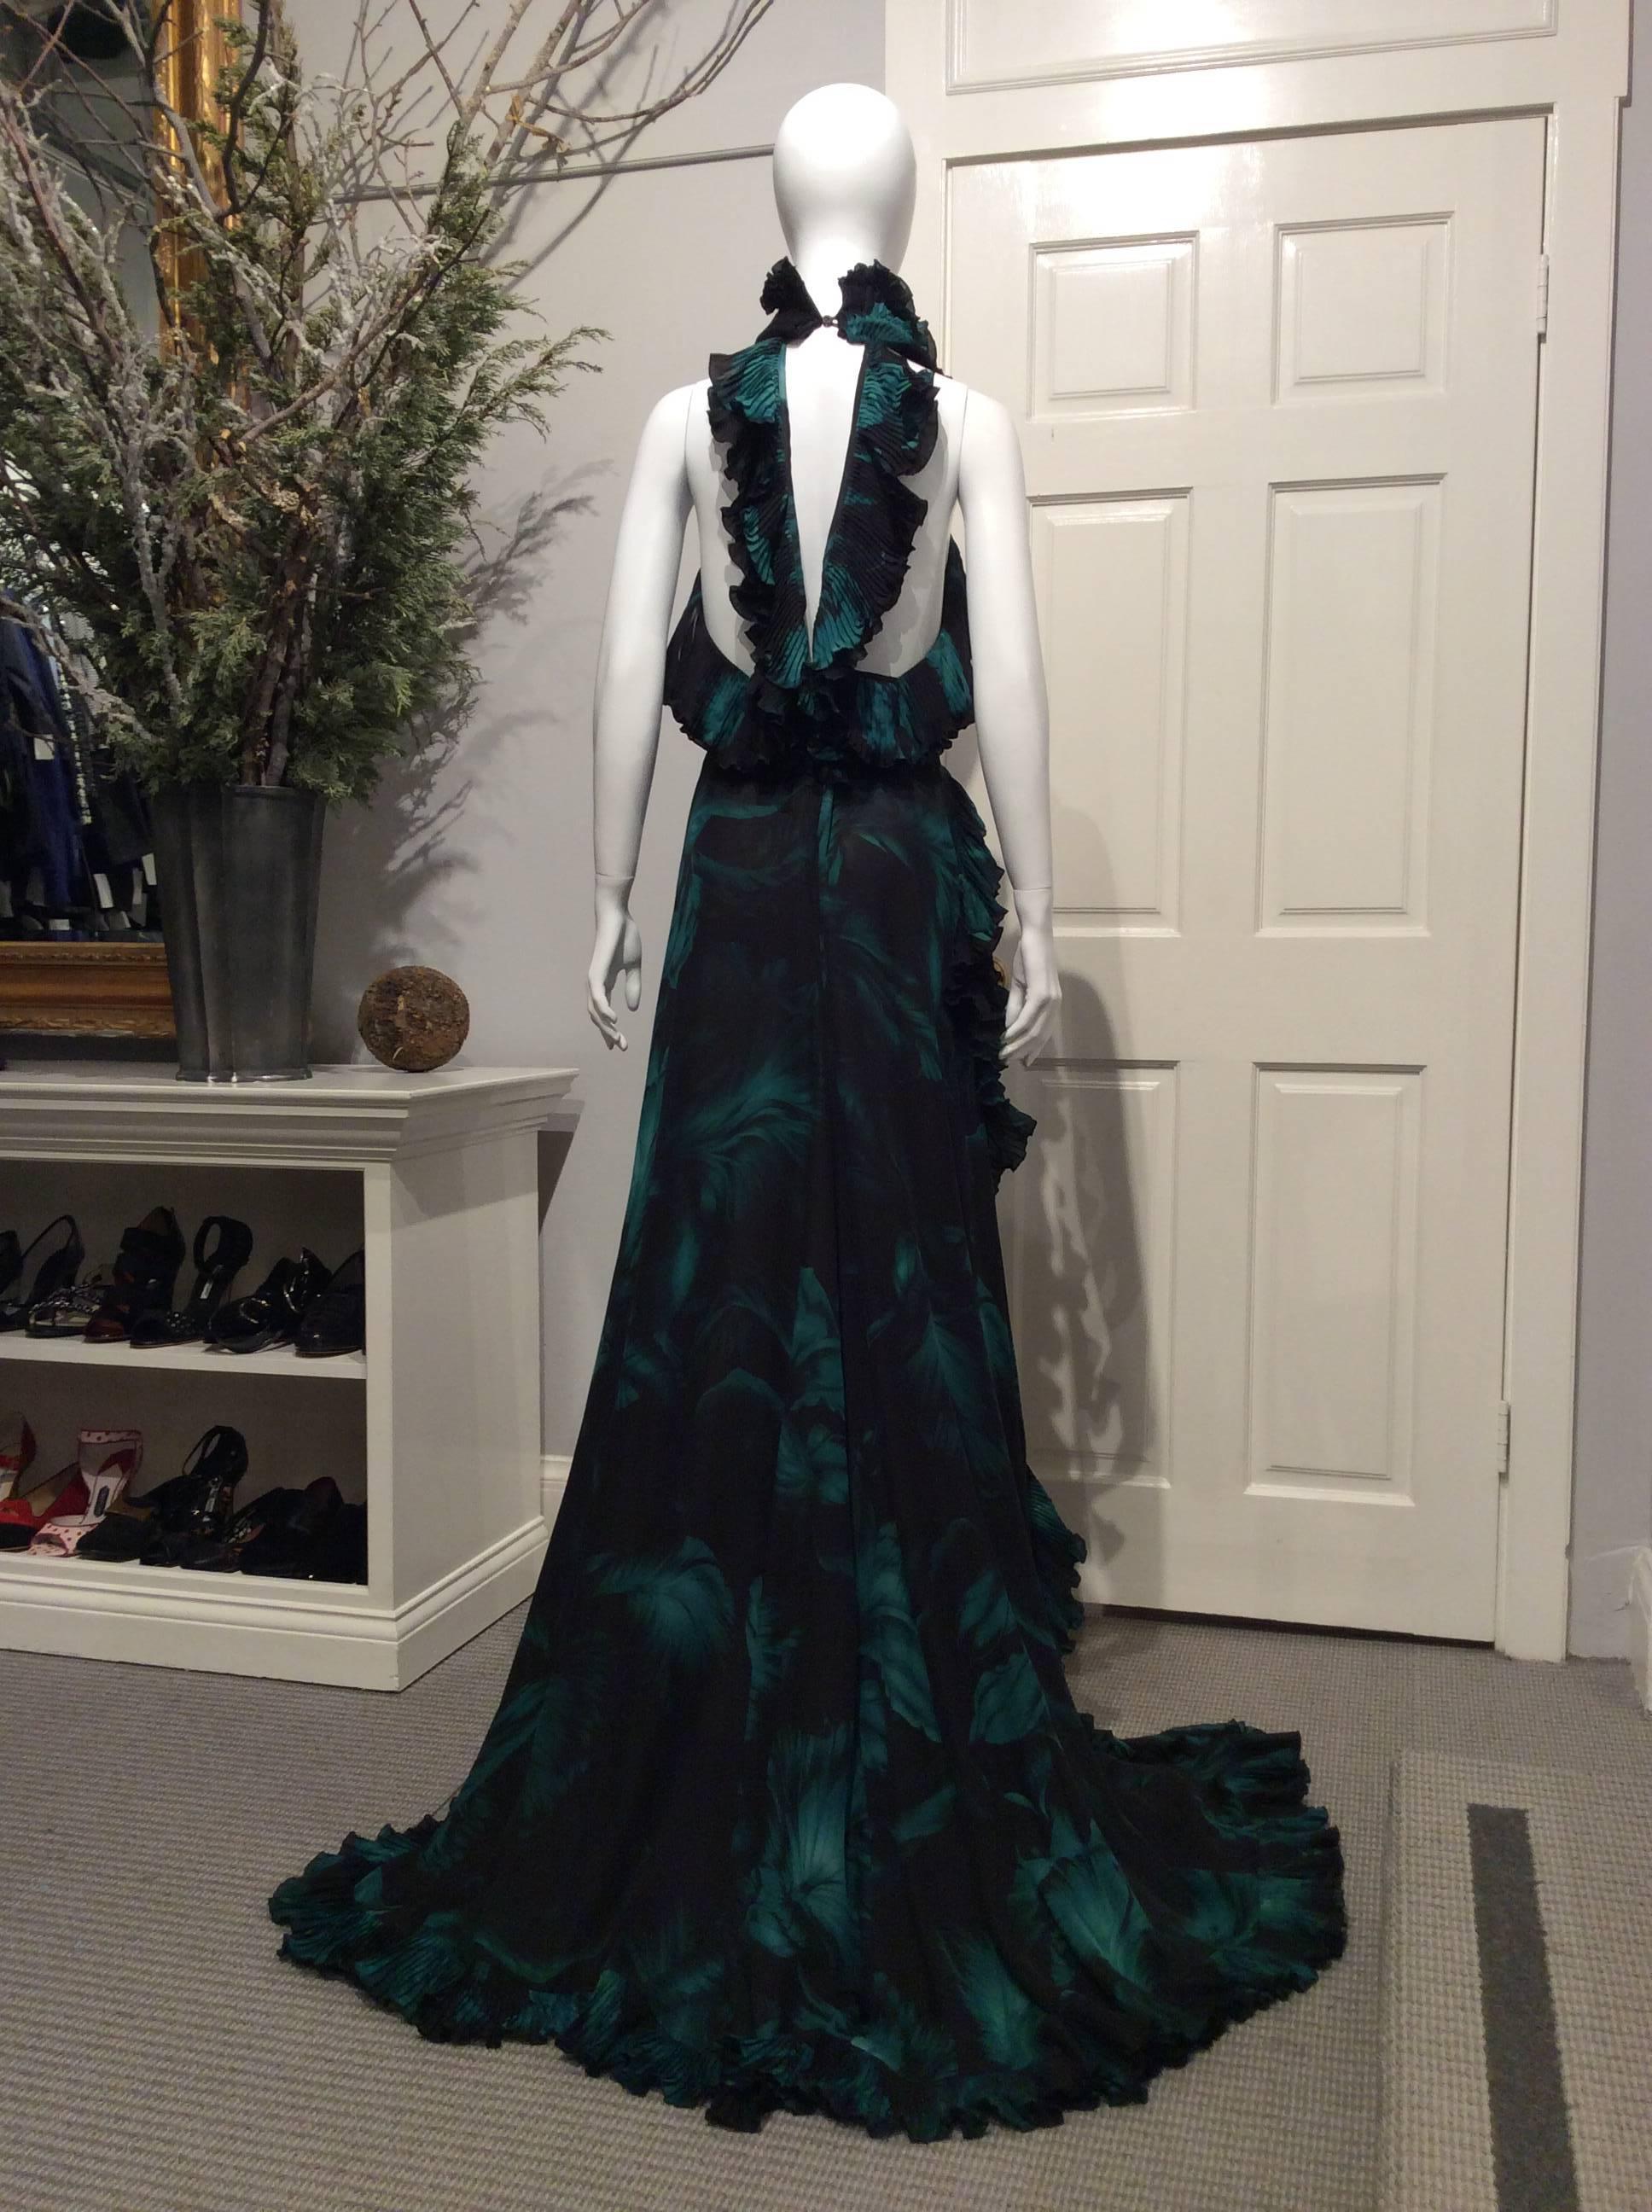 Long Gucci silk satin gown in a black and deep green tropical leaf print with a low back.  Pleated ruffles are strategically placed to enhance the neck, back straps, and edge.  The hip high slit of the flowy skirt pools on the front and has a slight